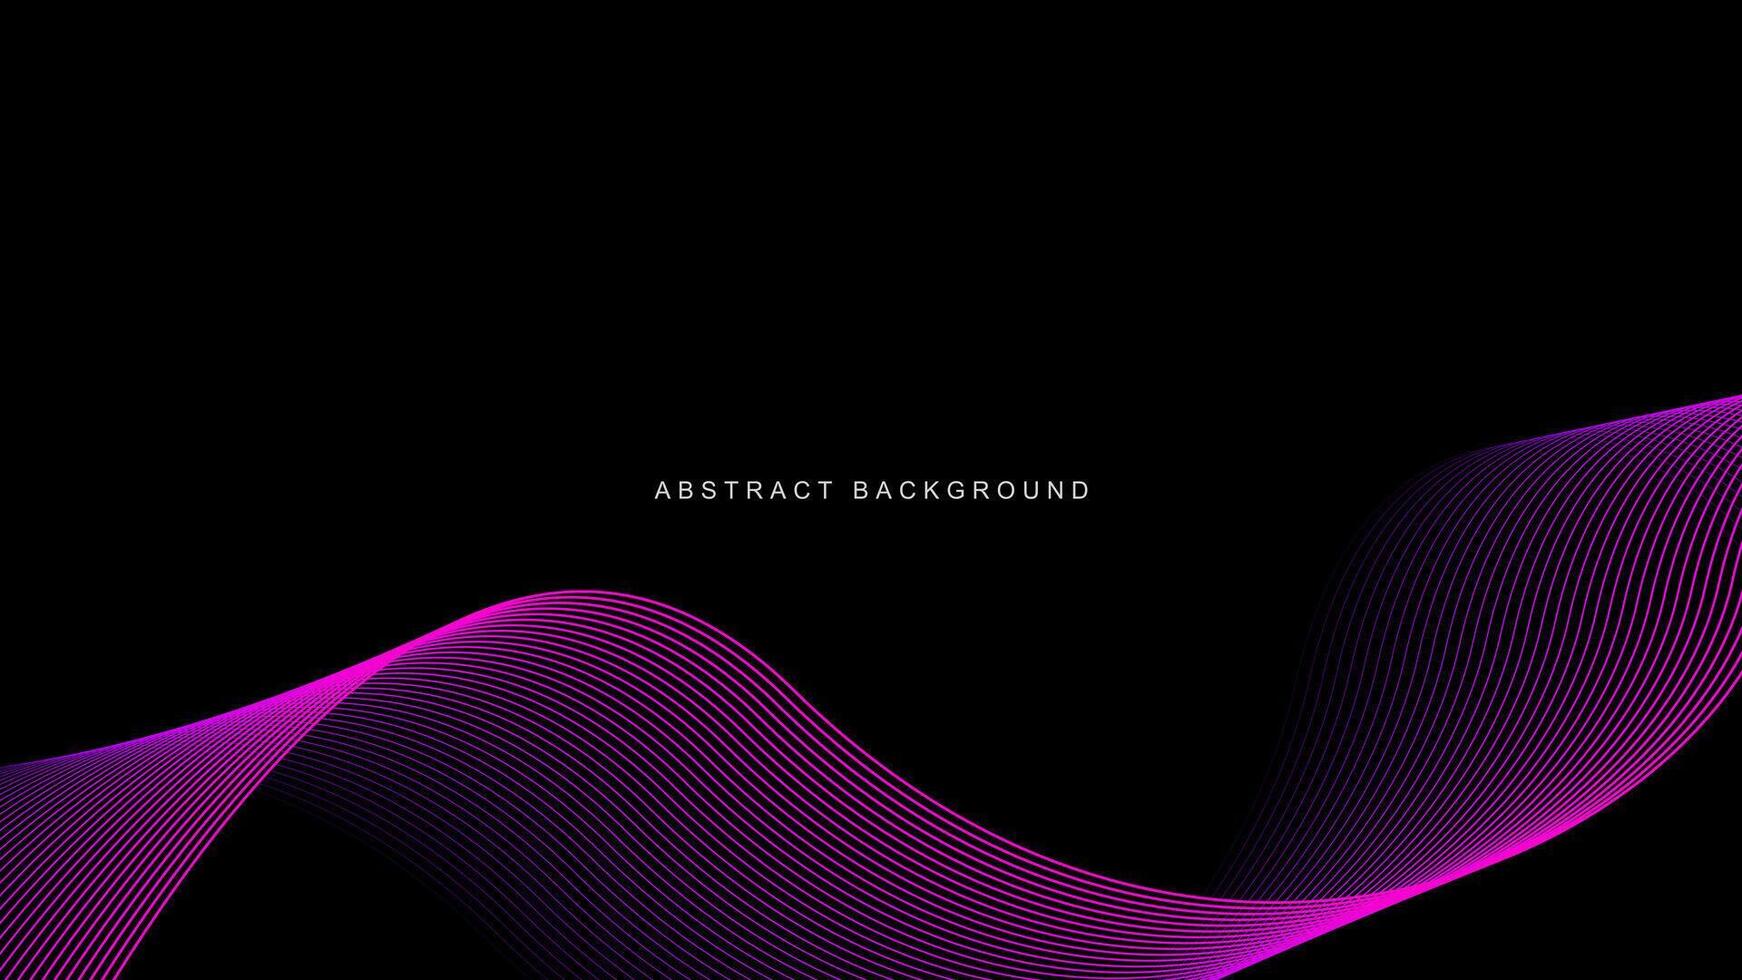 Abstract pink wavy lines pattern isolated on black background with technology, science, music theme. illustration vector